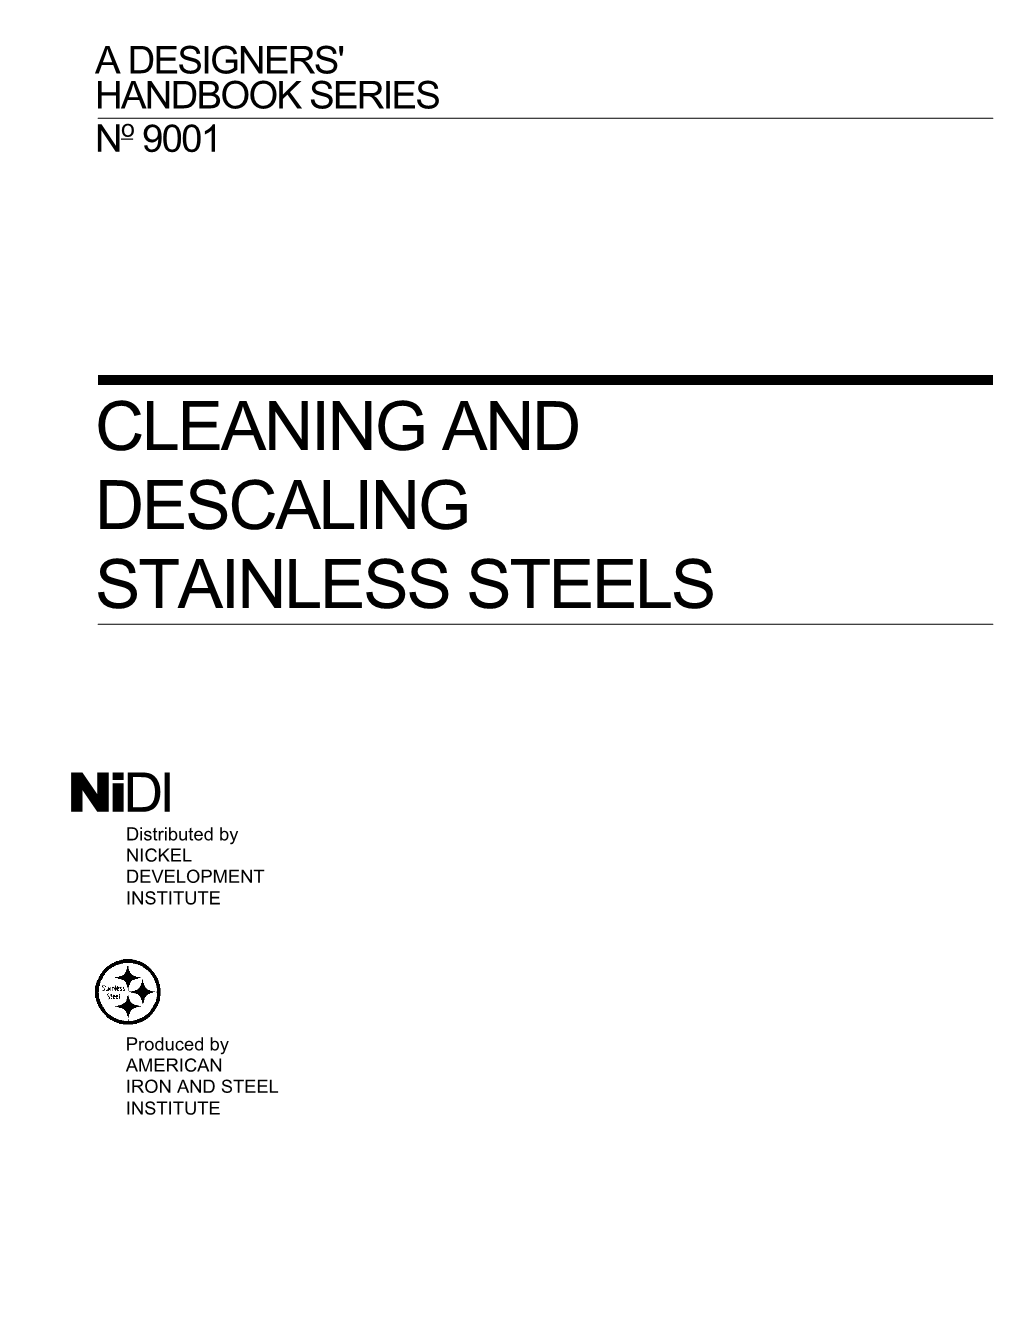 Vapor Blasting Cleaning & Descaling Stainless Steel